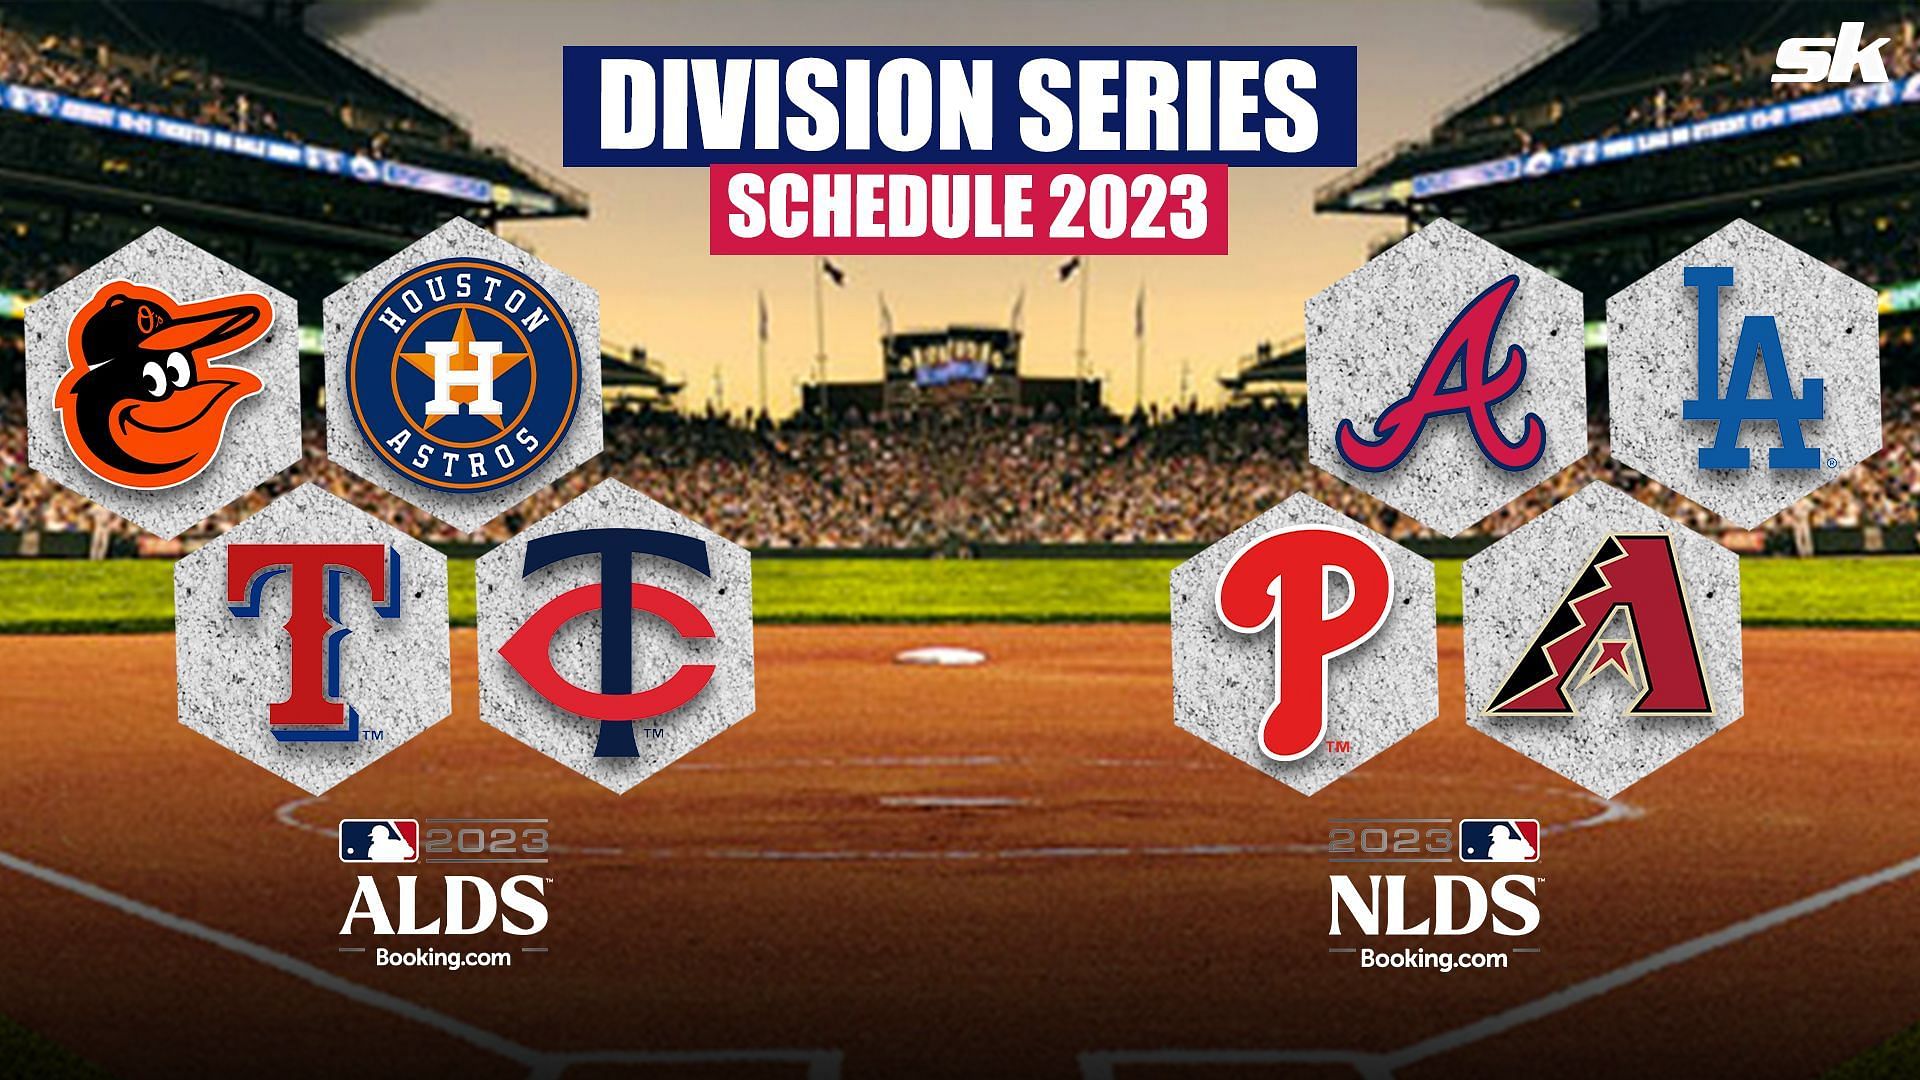 MLB Division Series schedule 2023: Dates, How to Watch, TV Channel